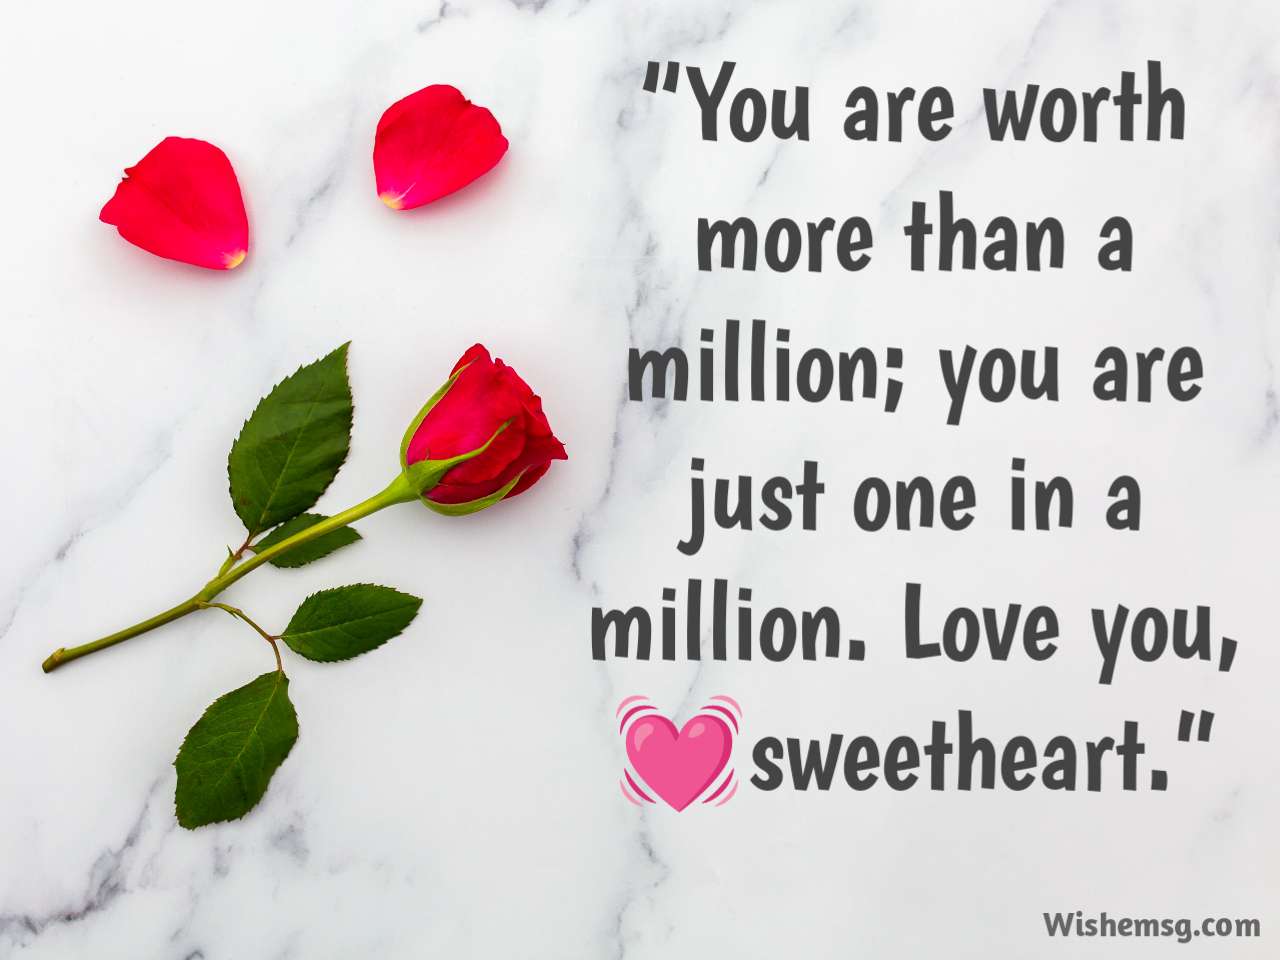 200+ Love Messages For Her - Wishemsg.Com